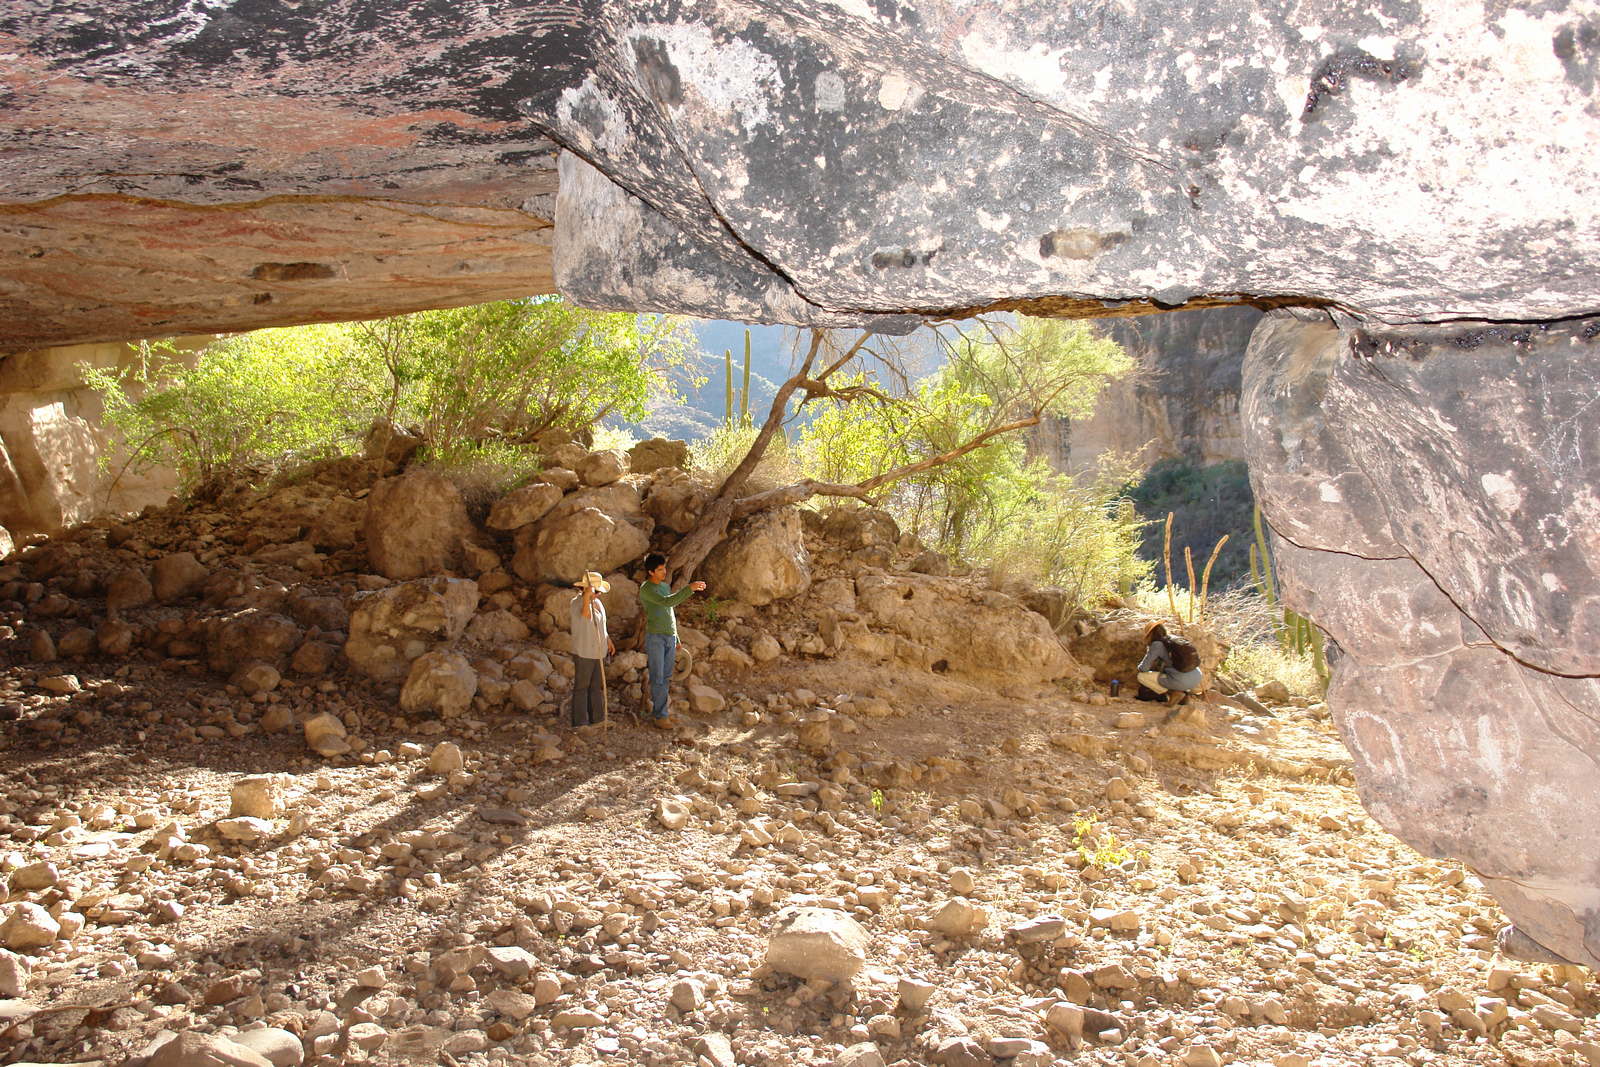 This slideshow shows images from the walls of the cave.   There are petroglyphs and some painting on the walls.